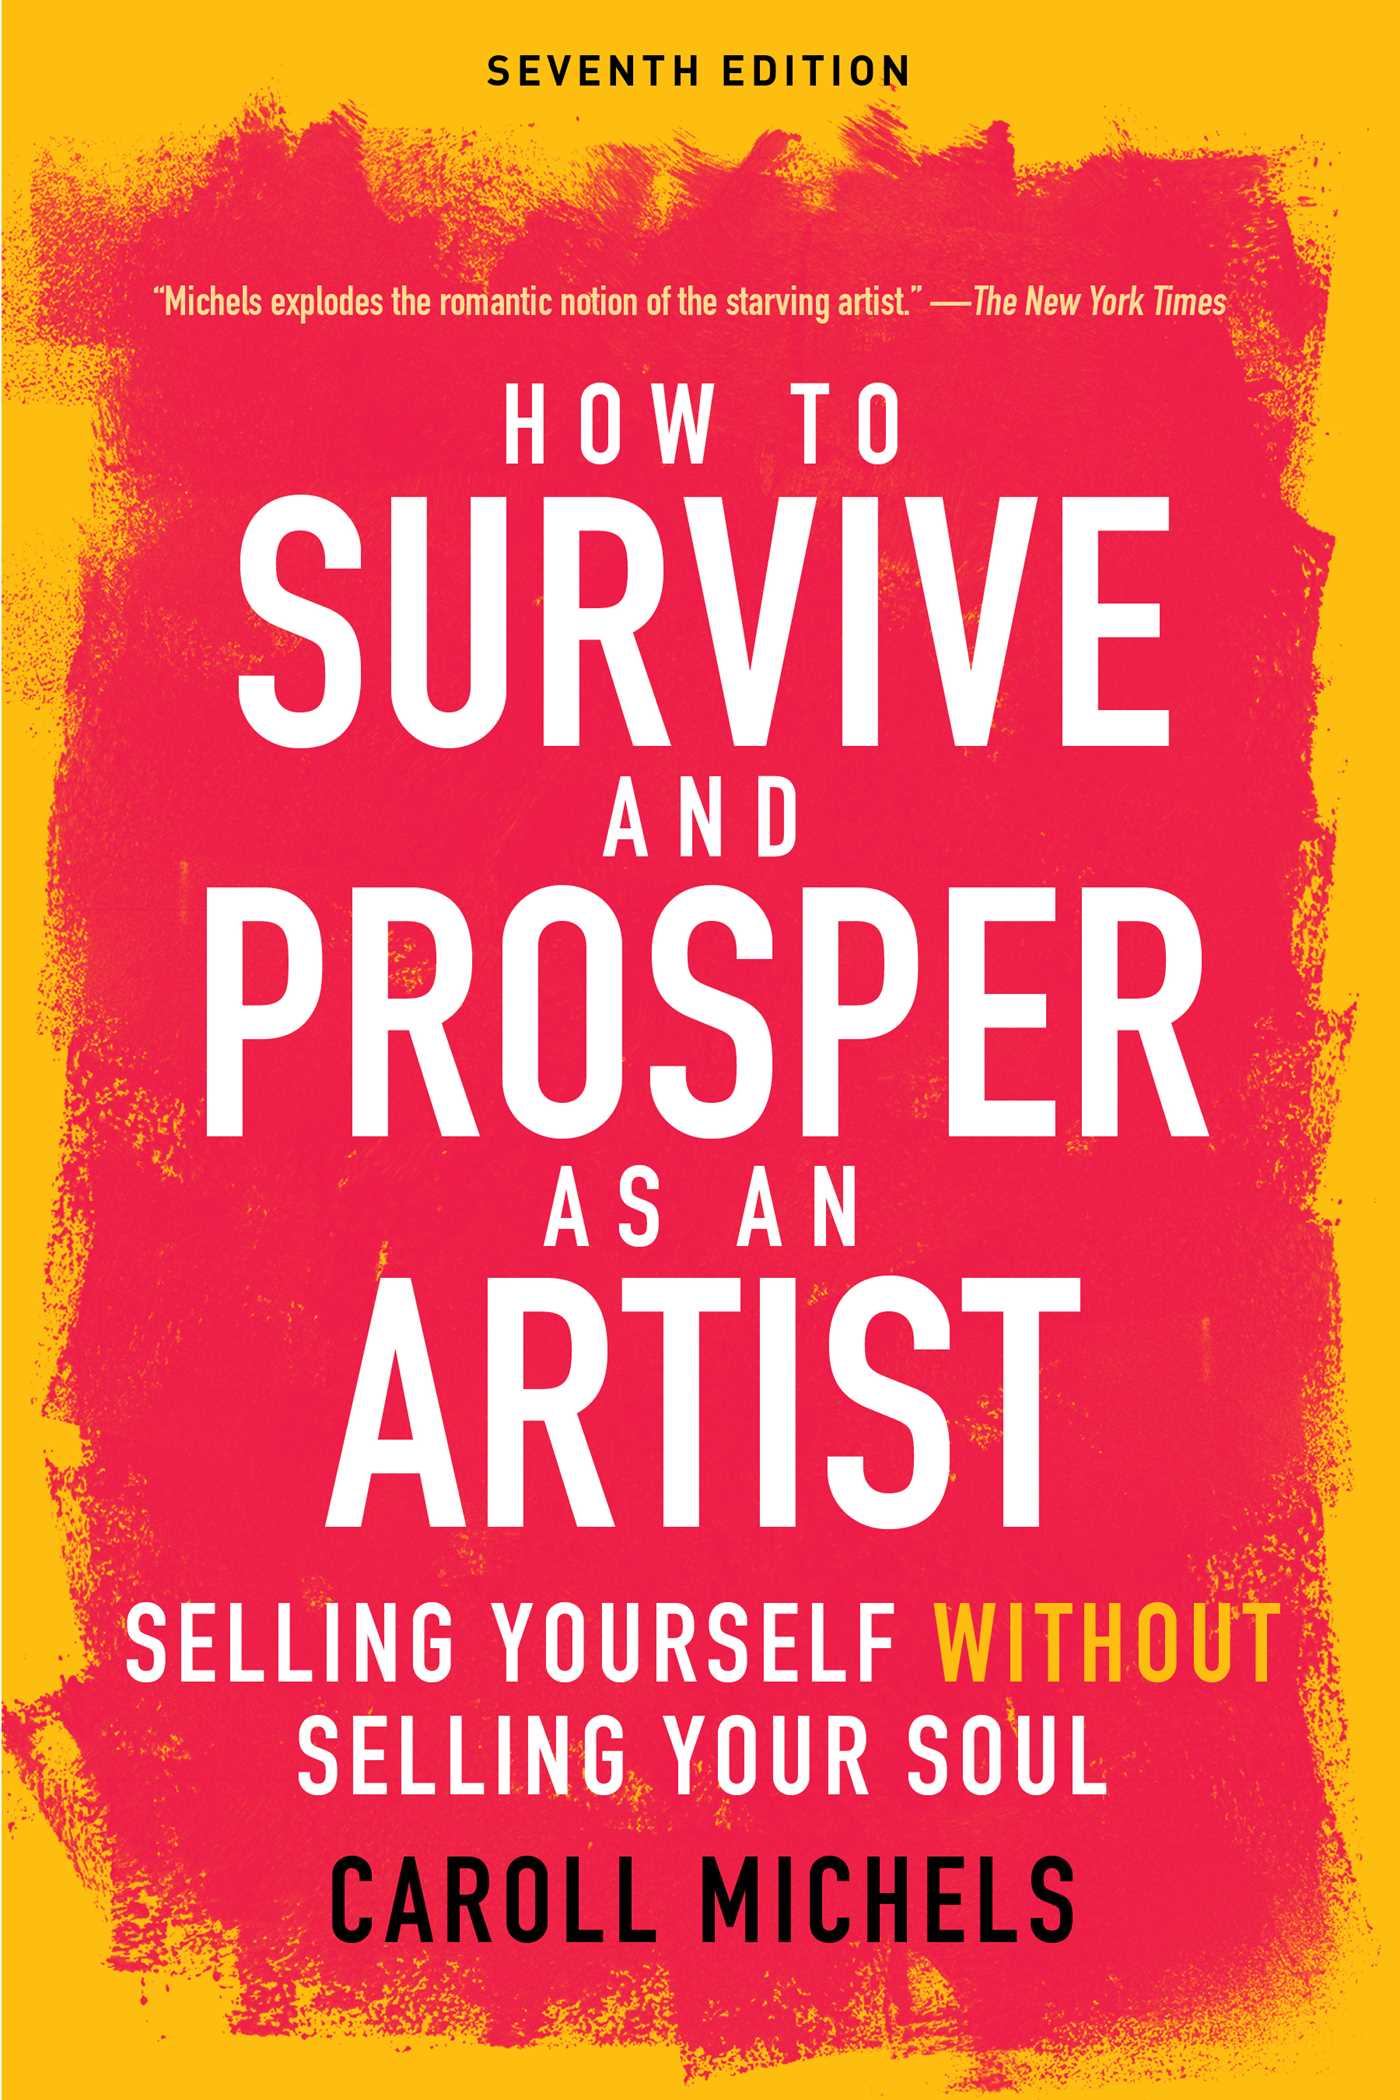 How to Survive and Prosper as an Artist : Selling Yourself without Selling Your Soul (Seventh Edition) (Edition 7) (Paperback) - image 1 of 1